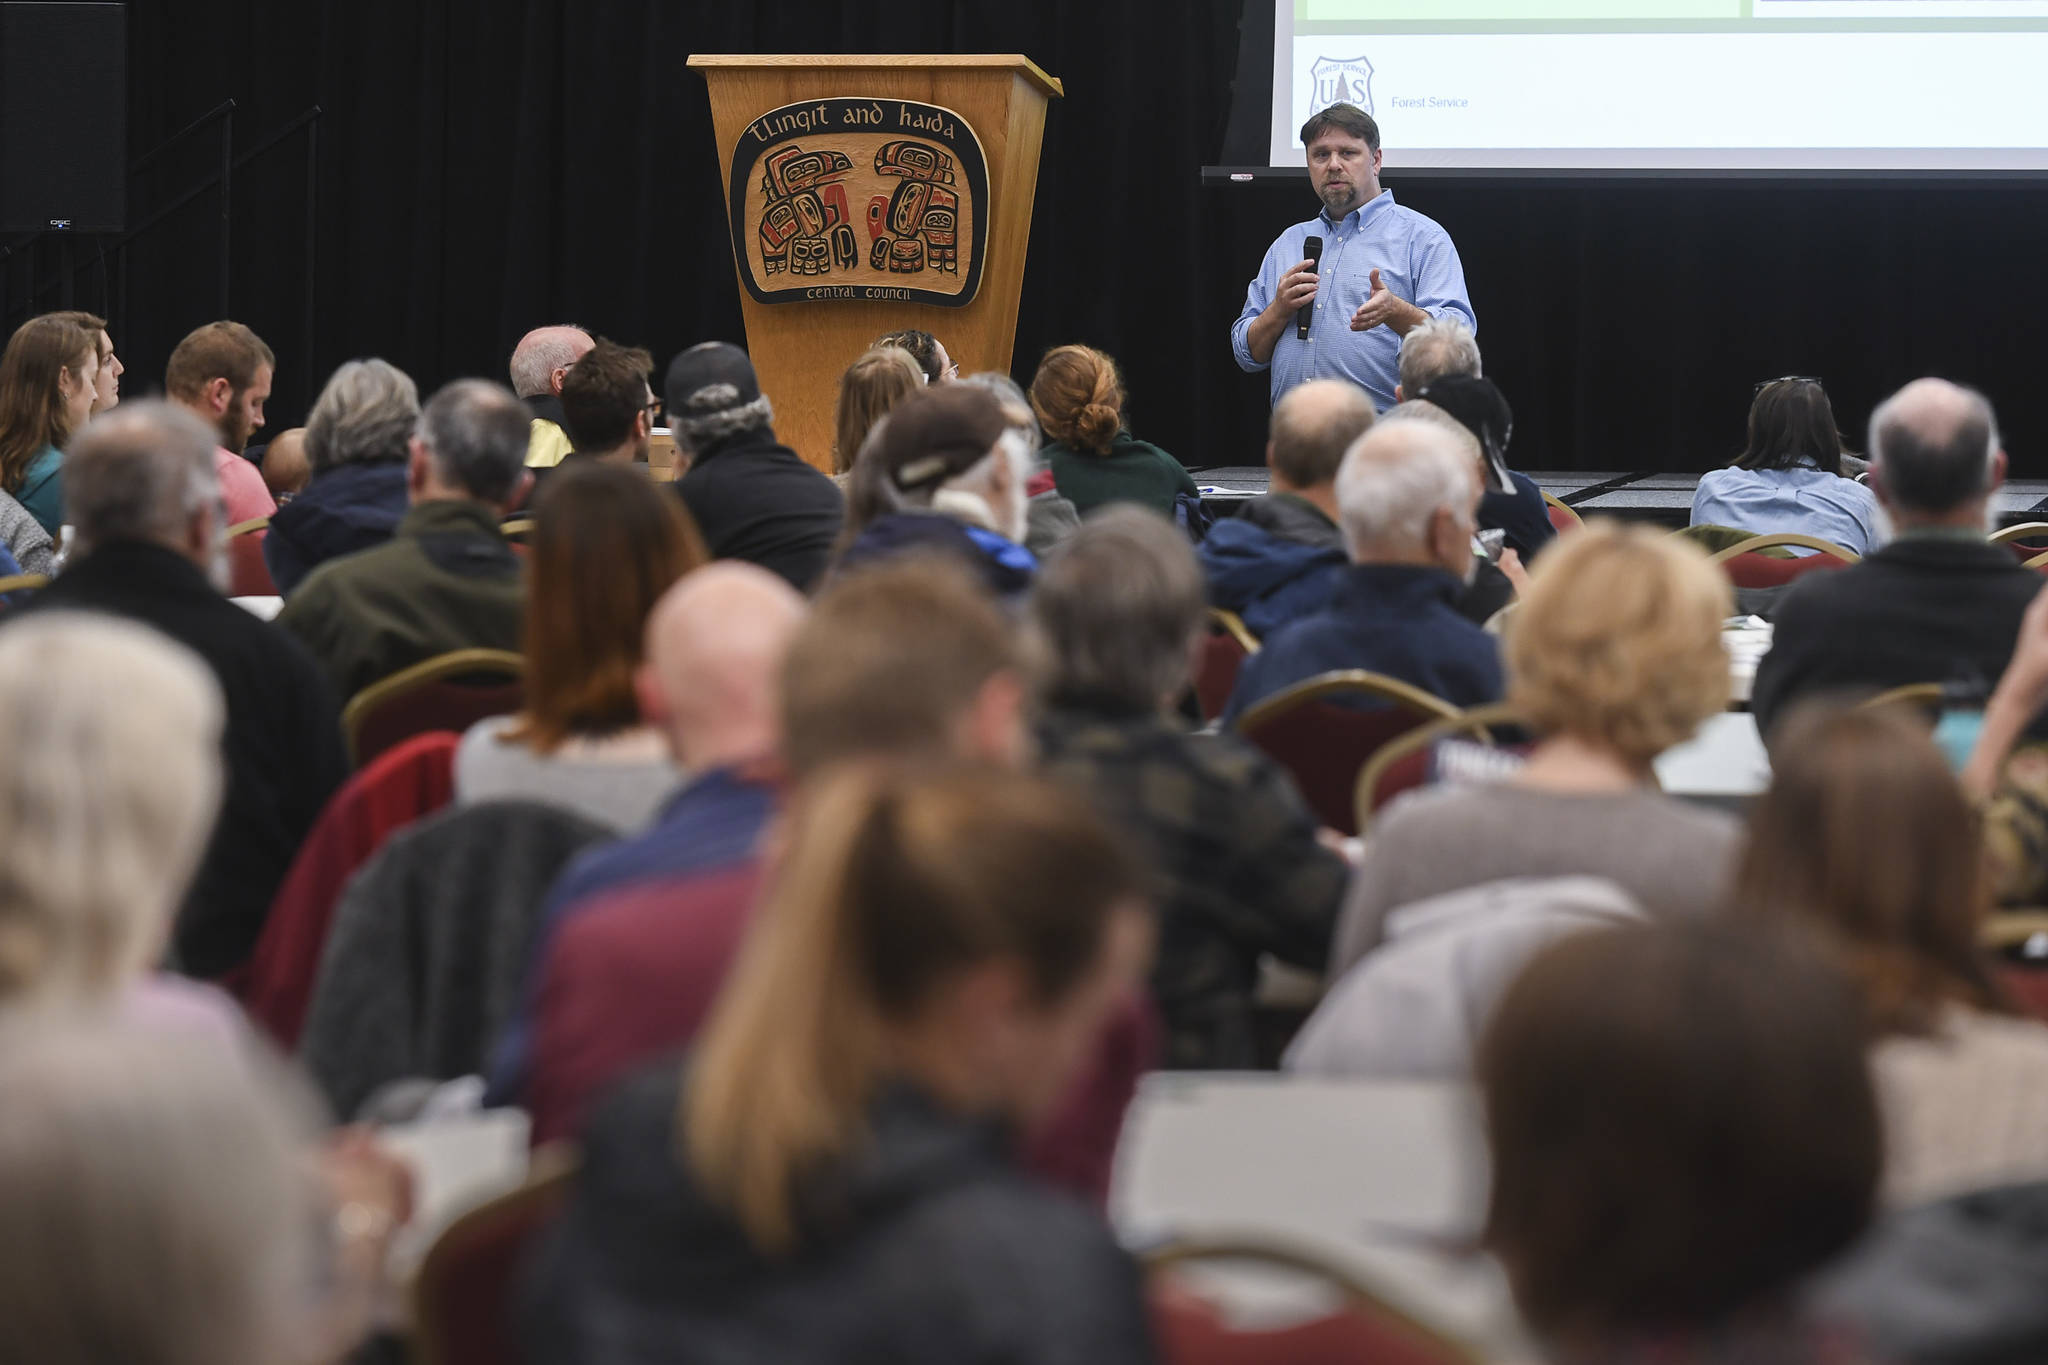 Juneau residents listen to a U.S. Department of Agriculture Forest Service informational meeting lead by National Forest System Deputy Chief Chris French on the Rulemaking for Alaska Roadless Areas Draft Environmental Impact Statement at Elizabeth Peratrovich Hall on Monday, Nov. 4, 2019. (Michael Penn | Juneau Empire)